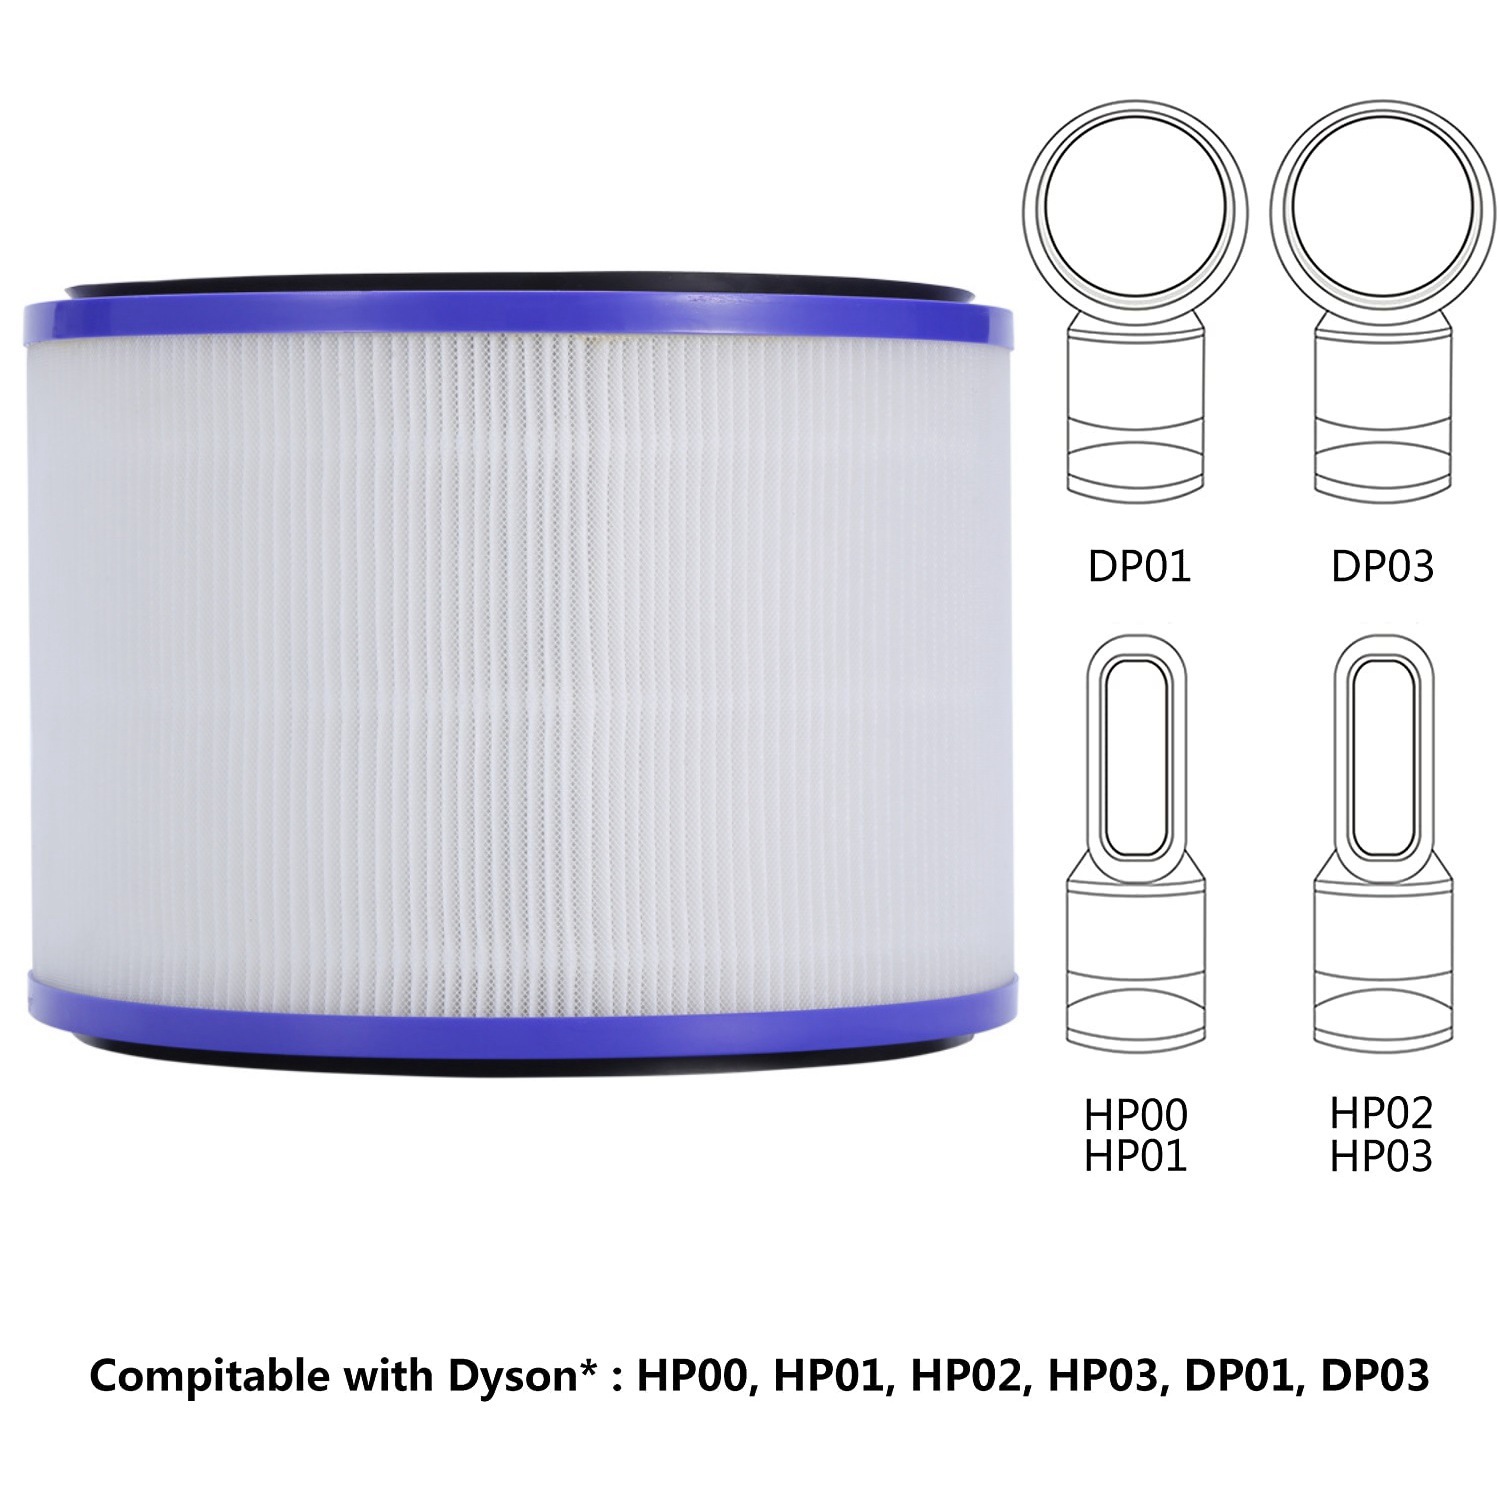 Looking to Buy The Hottest New Fan. See Why The Dyson Pure Hot+Cool HP03 is The One